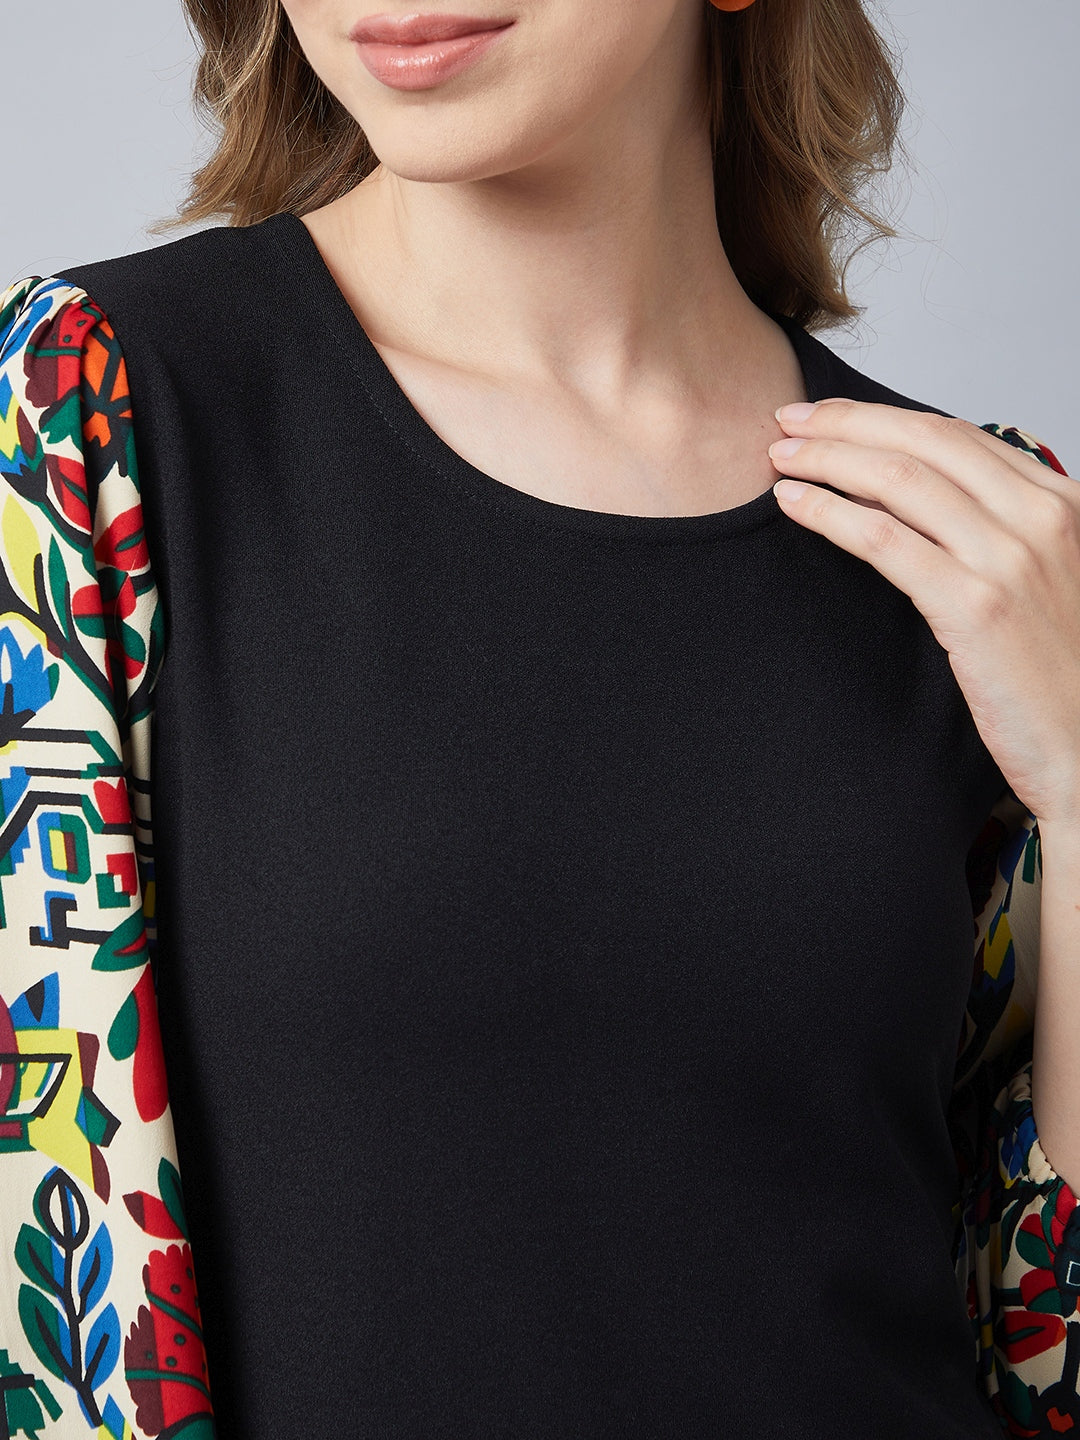 Black-&-Multi-Polyester-Dress-With-Printed-Balloon-Sleeves